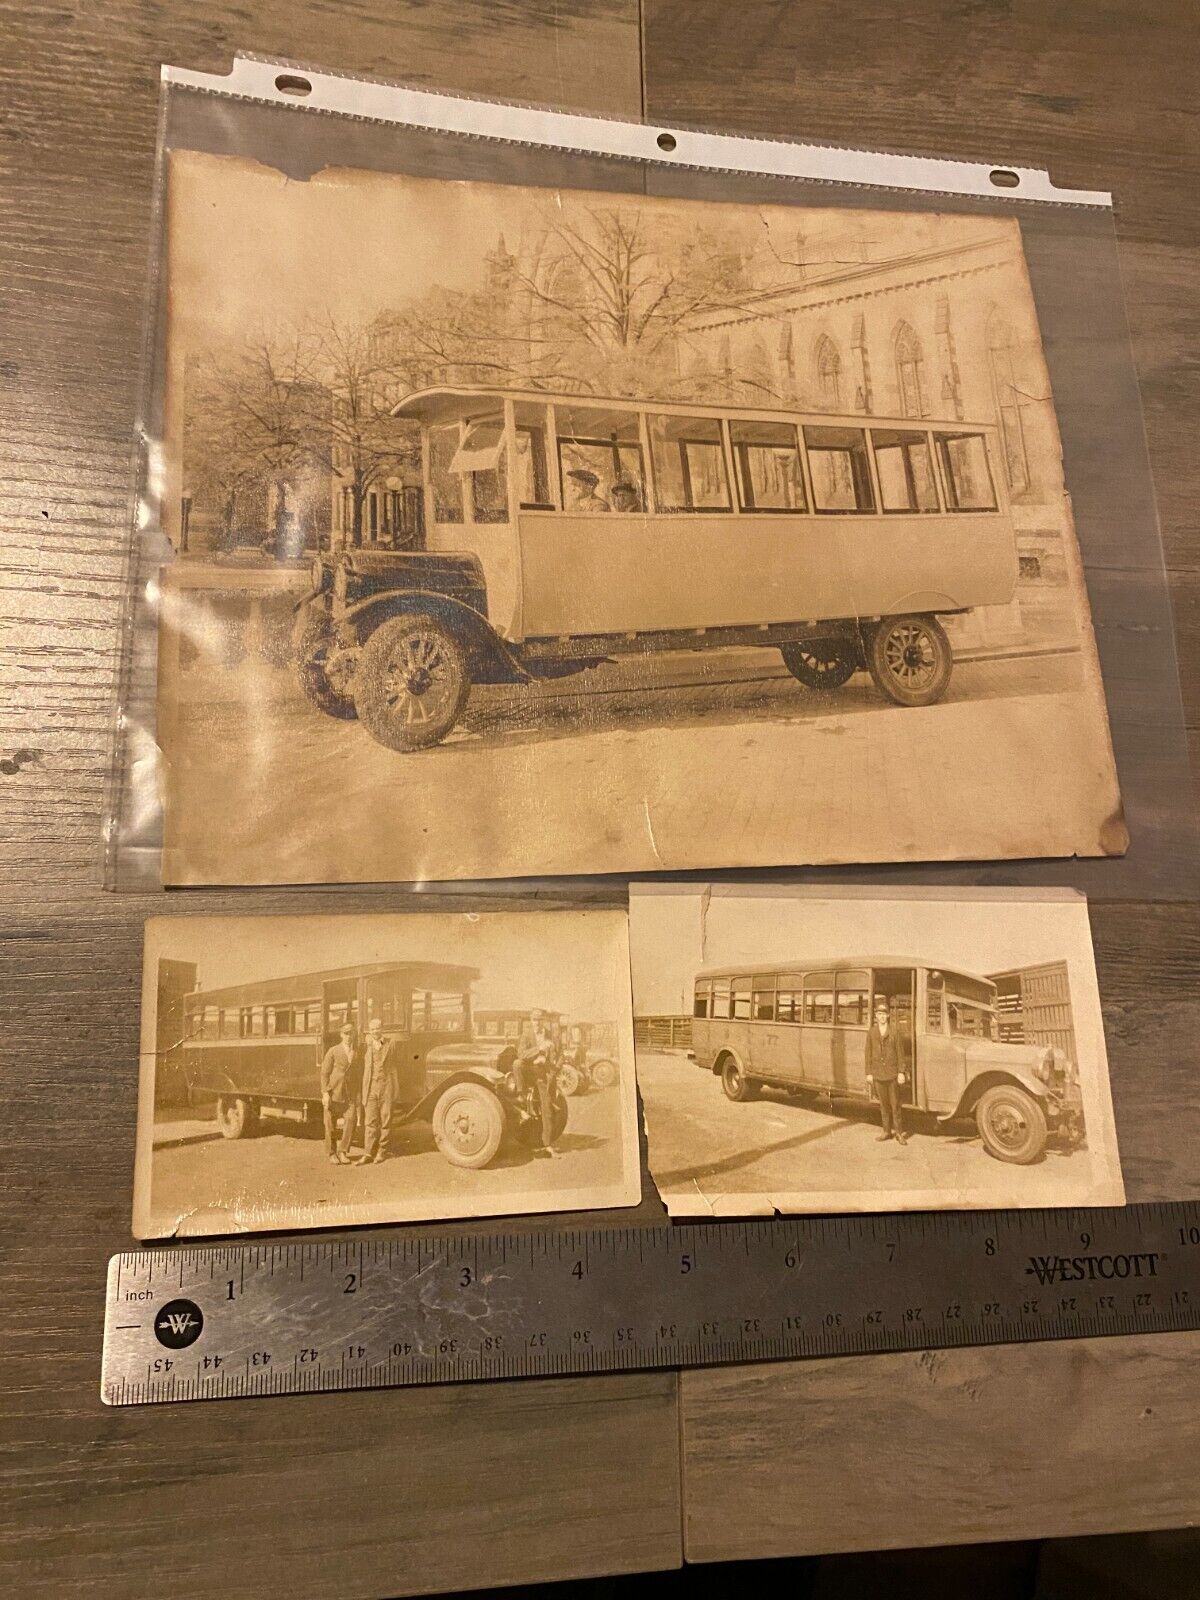 Lot of 3 Vintage Photos chauffeur w/ car and buses